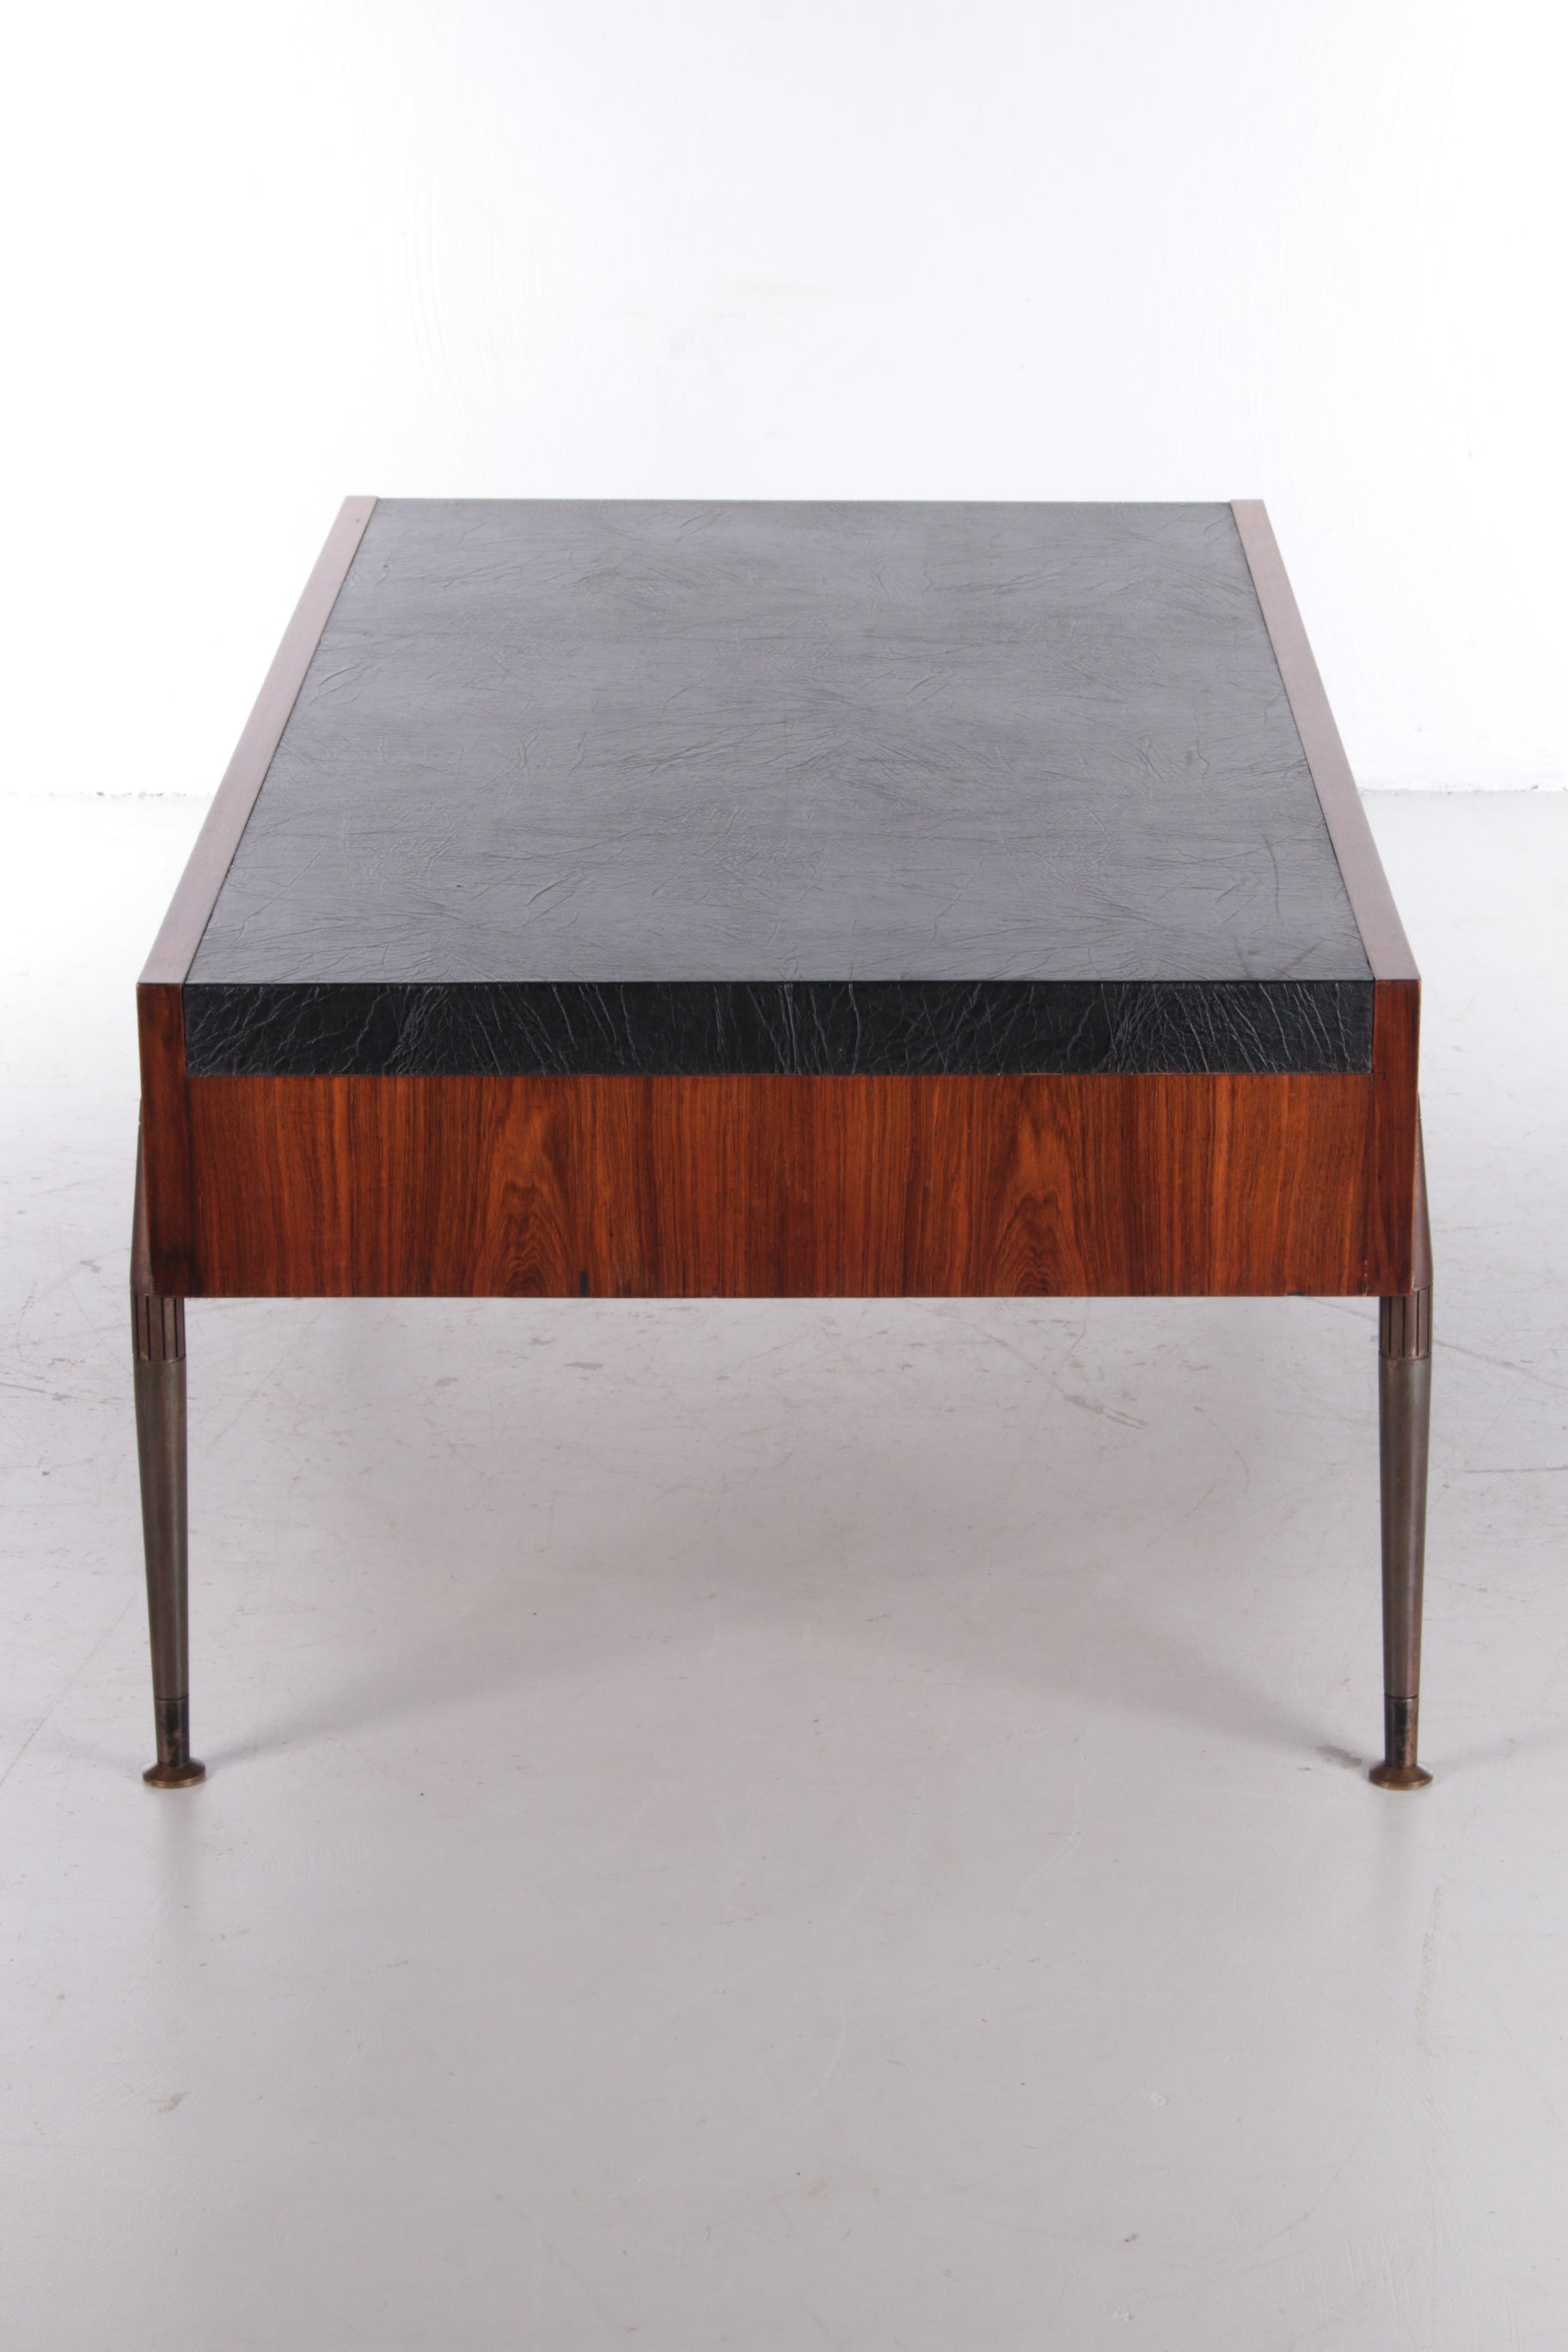 marketing rand Van Mid-century coffee table upholstered in leather and bronze legs,1960s –  Timeless-Art